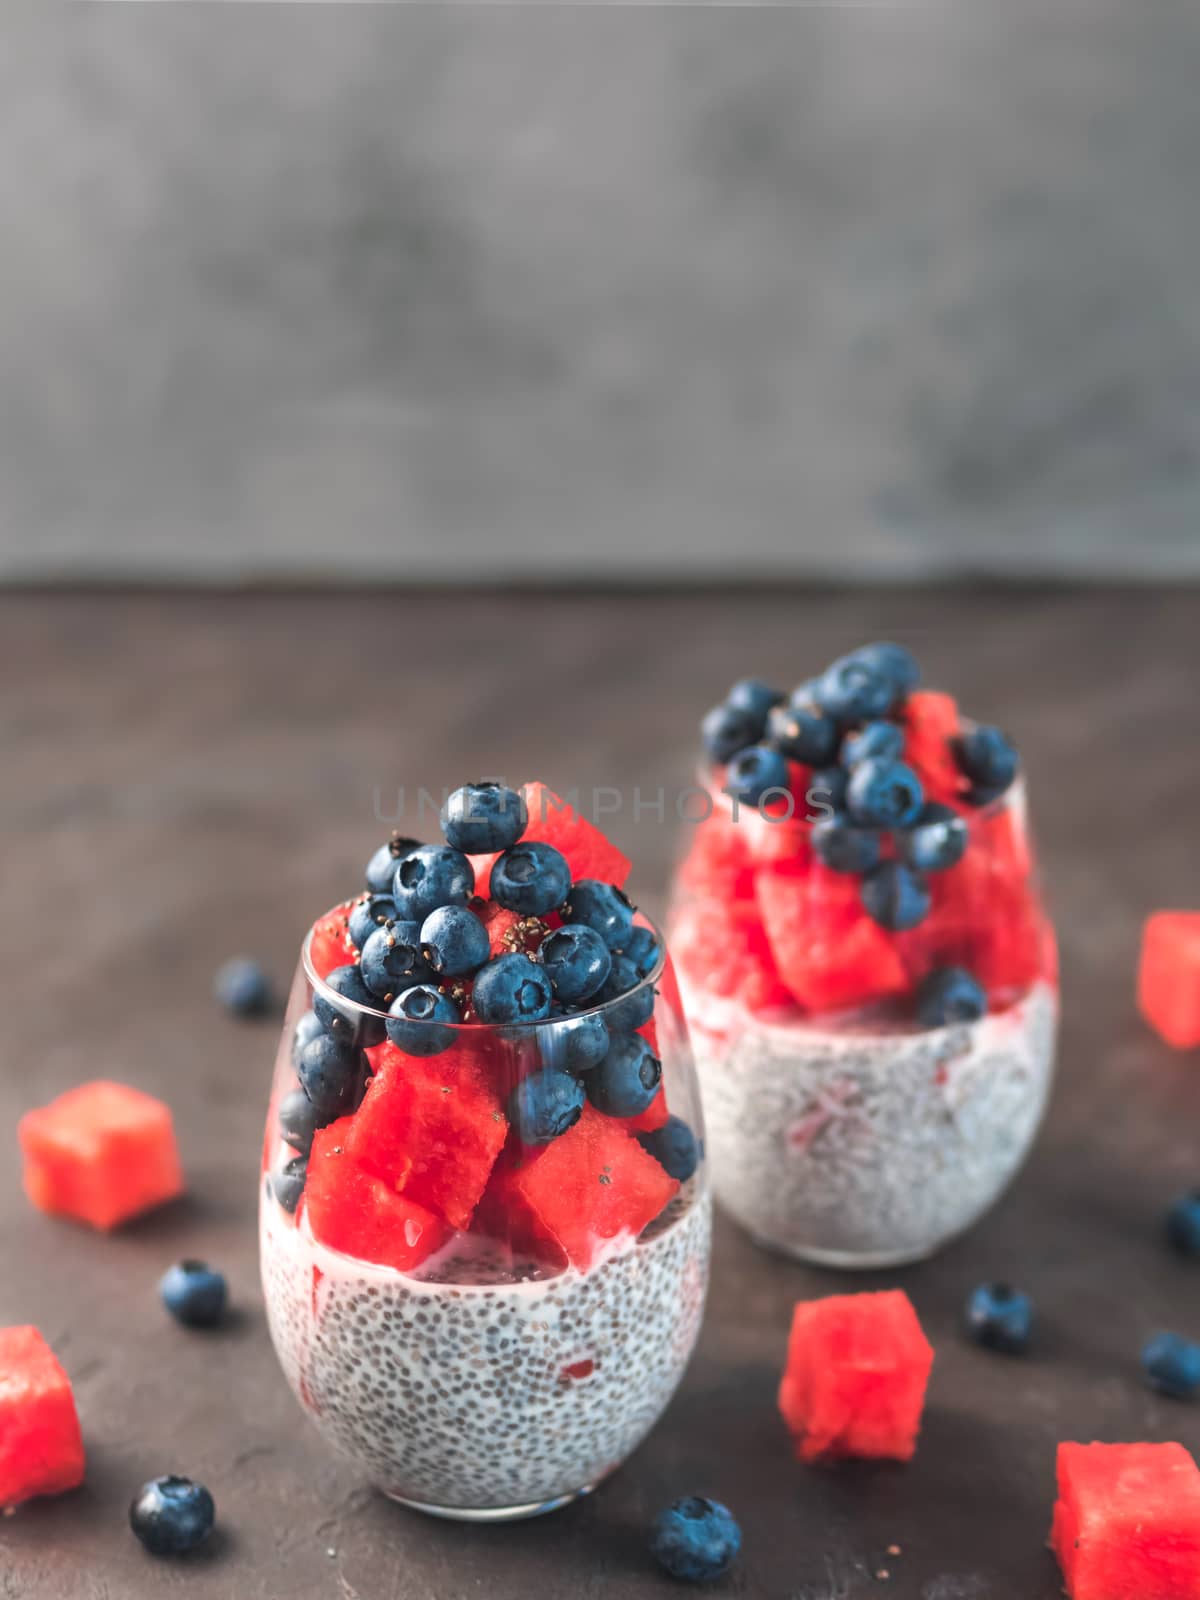 Healthy breakfast concept and idea - chia pudding with watermelon and blueberries. Two glass with chia pudding dressed watermelon and blueberry on dark background. Copy space for text. Vertical.